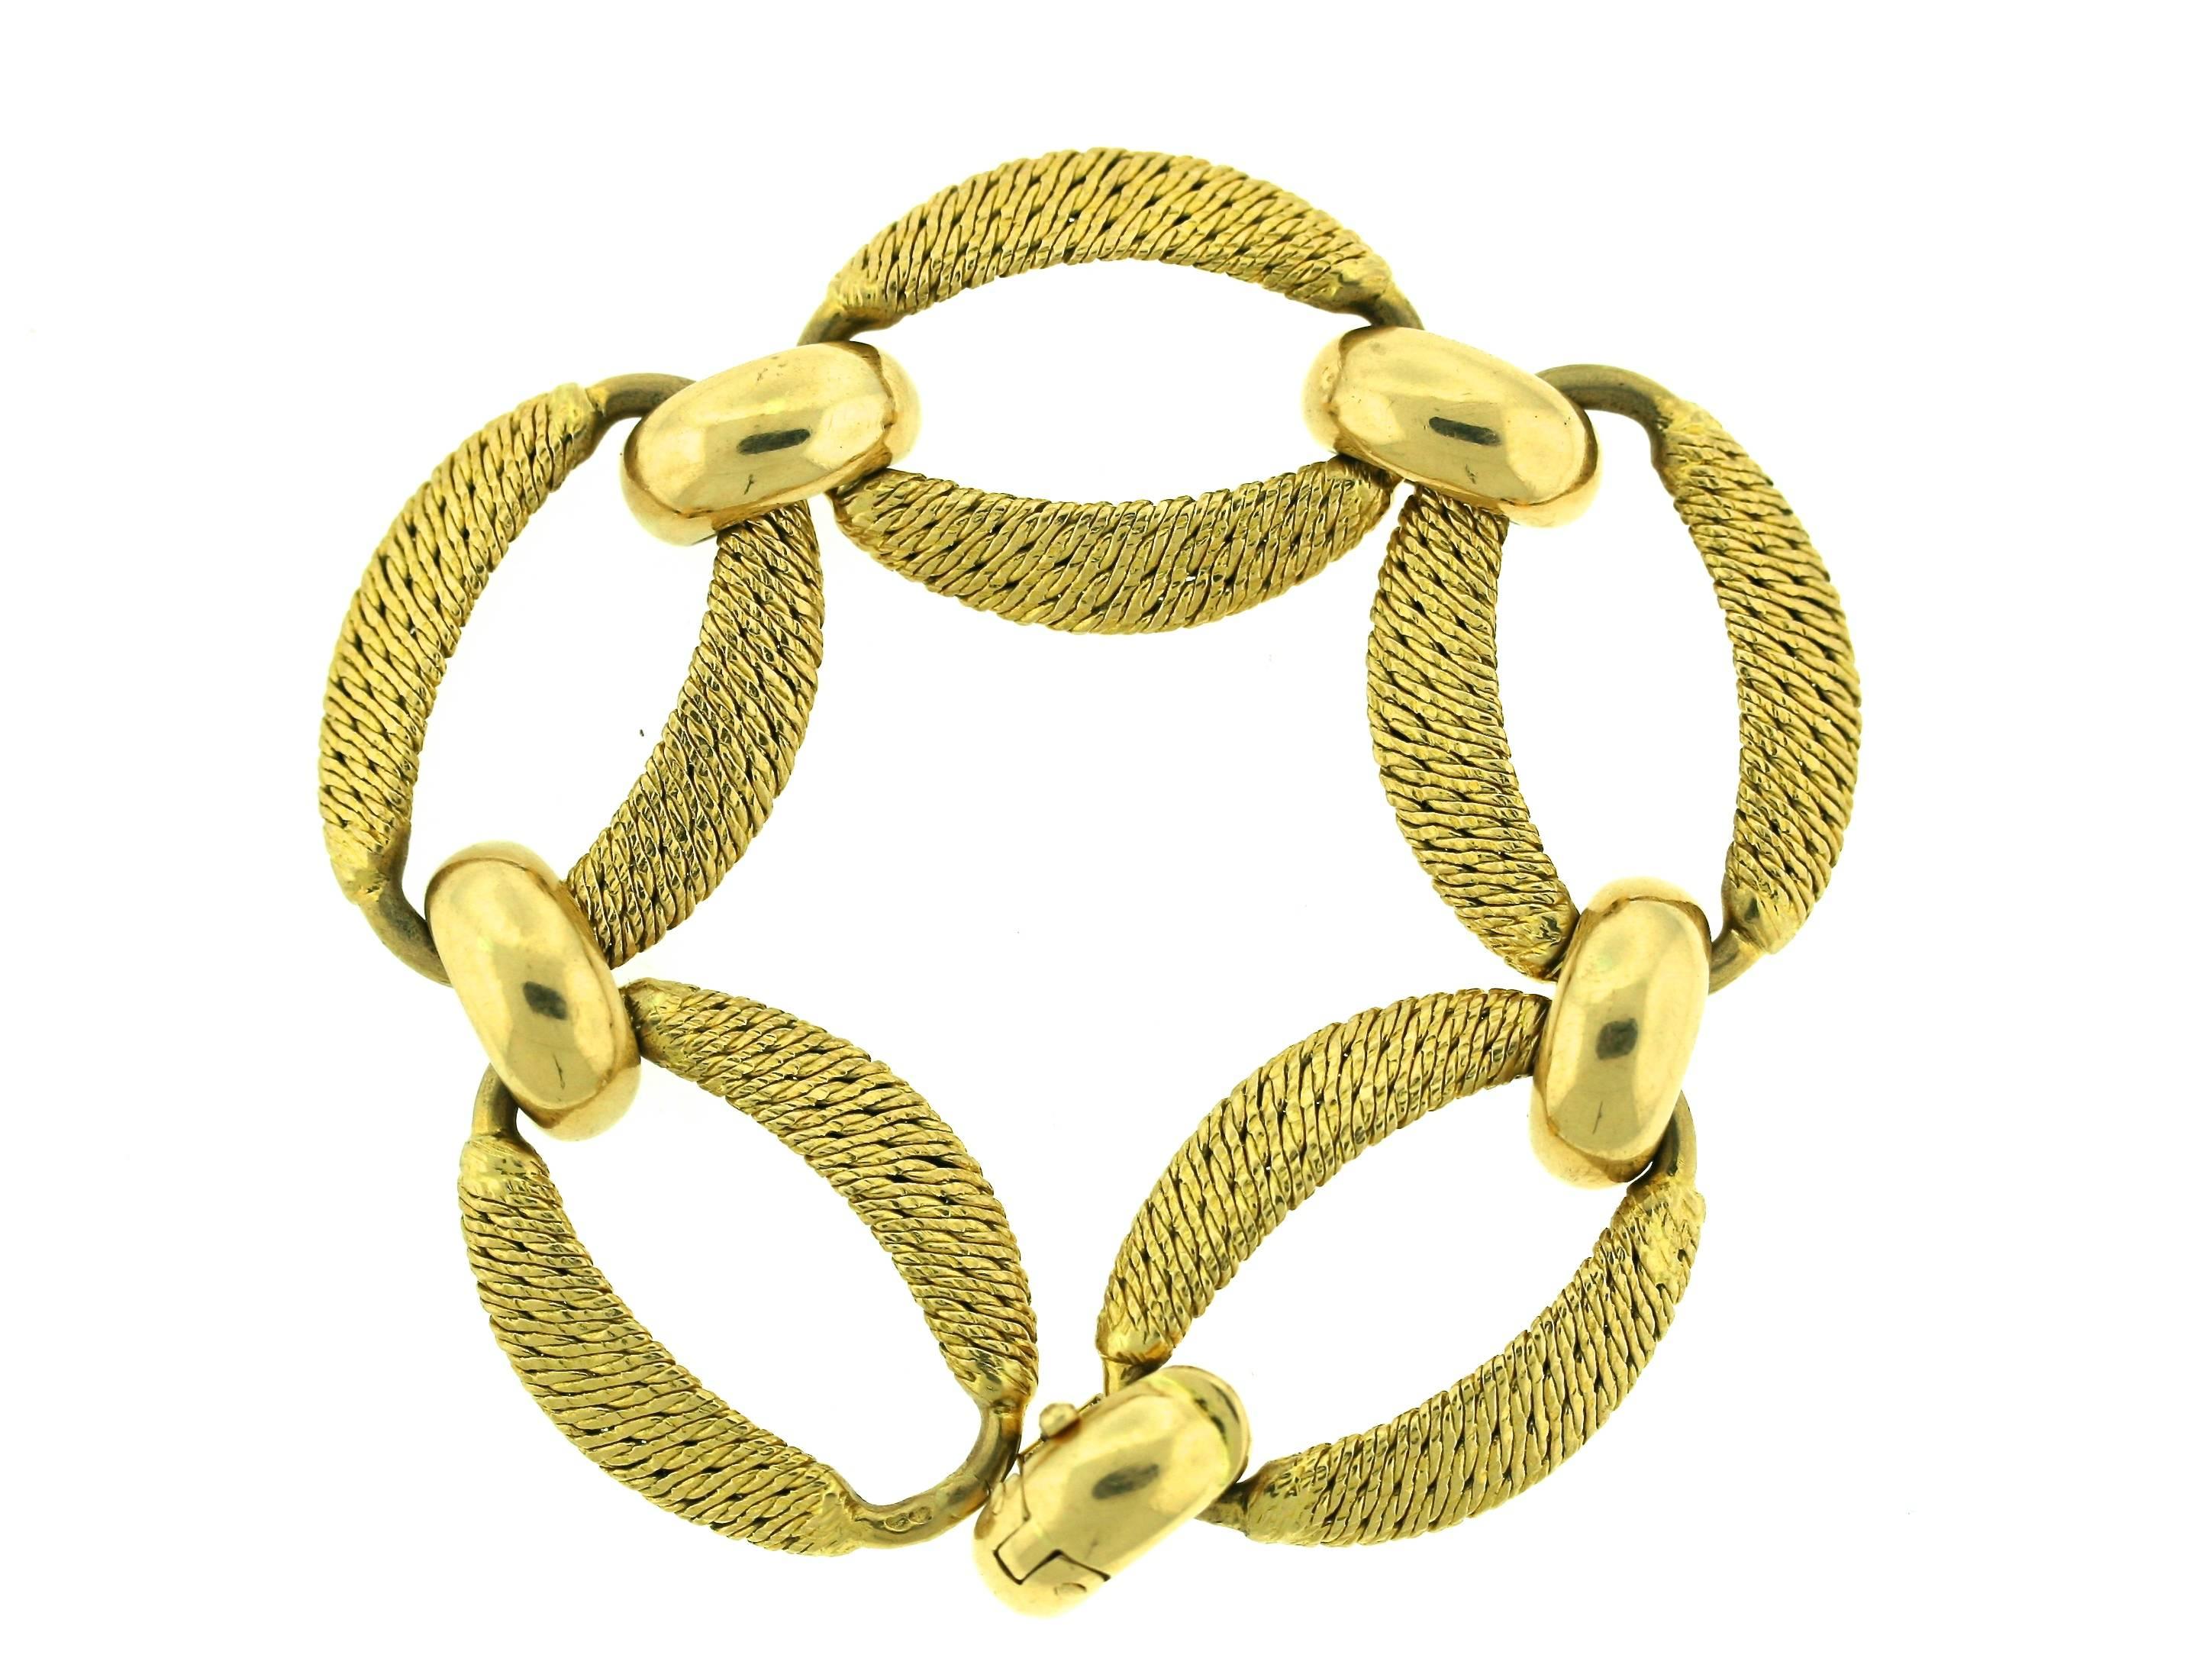 Mellerio dits Meller 18k woven gold open oval link bracelet joined by polished gold rounded top links. The technique of producing this type of a woven gold effect was popularized by several master French workshops in the 1970s such as Georges